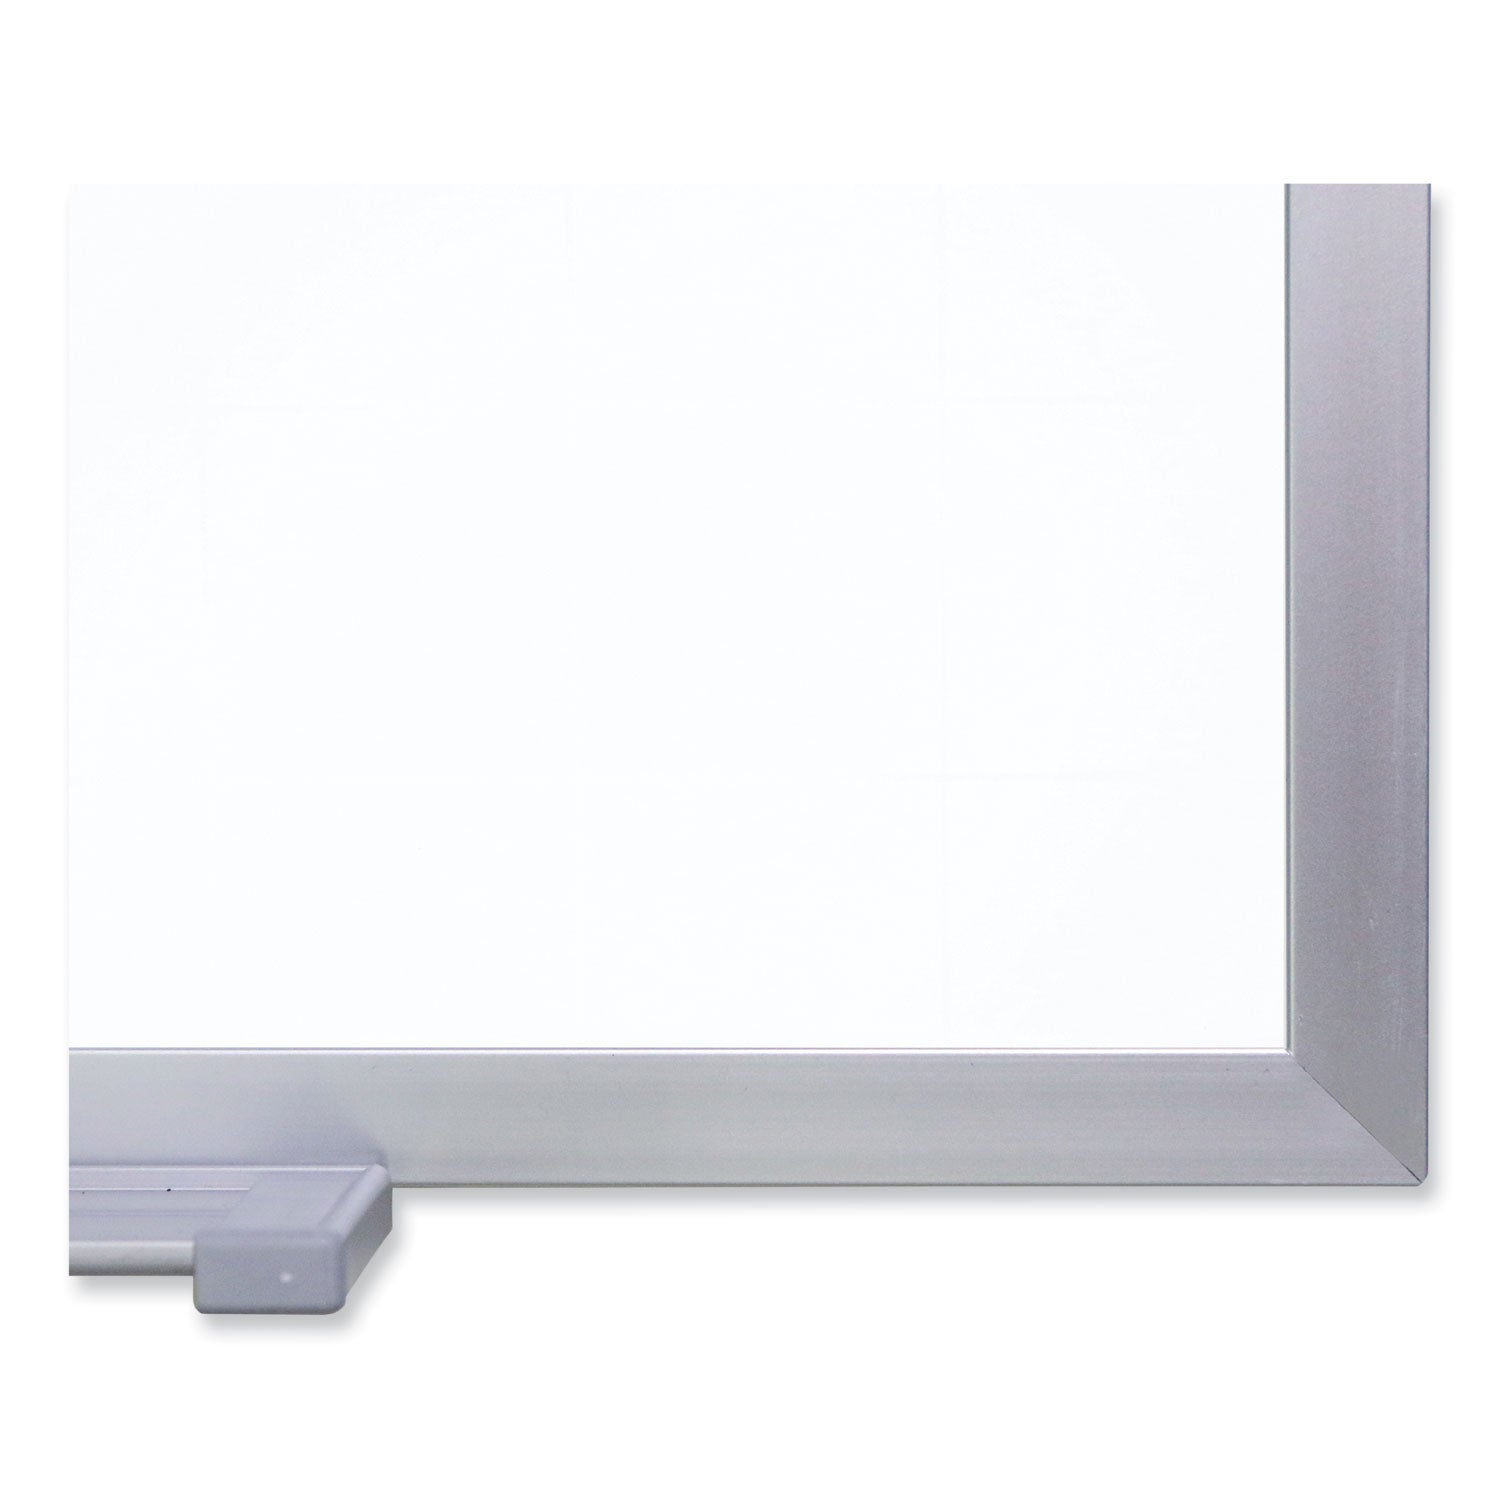 magnetic-porcelain-whiteboard-with-satin-aluminum-frame-485-x-485-white-surface-ships-in-7-10-business-days_ghem1444 - 3